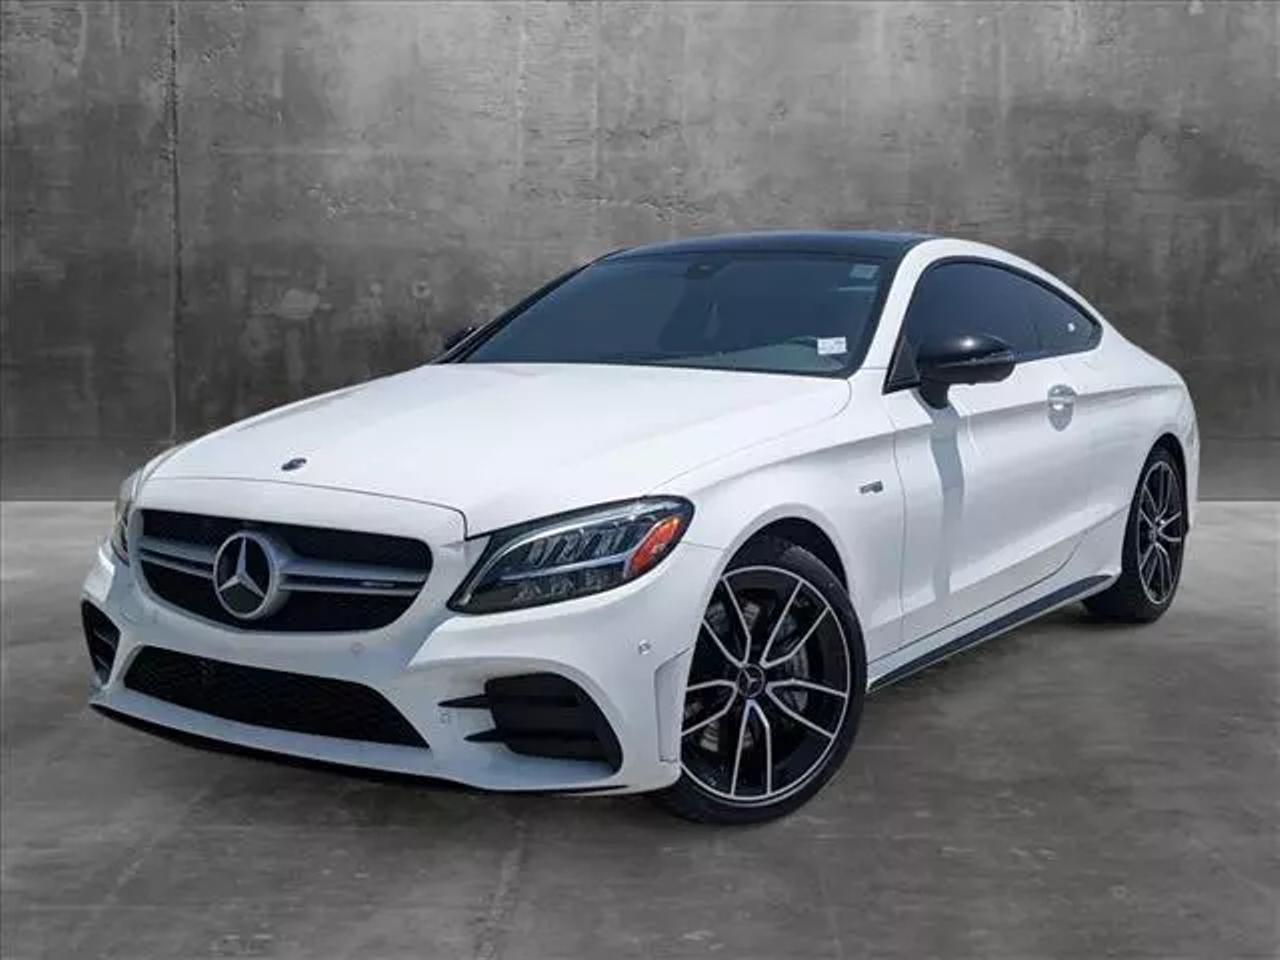 2021 Mercedes-AMG C43 4MATIC Coupe